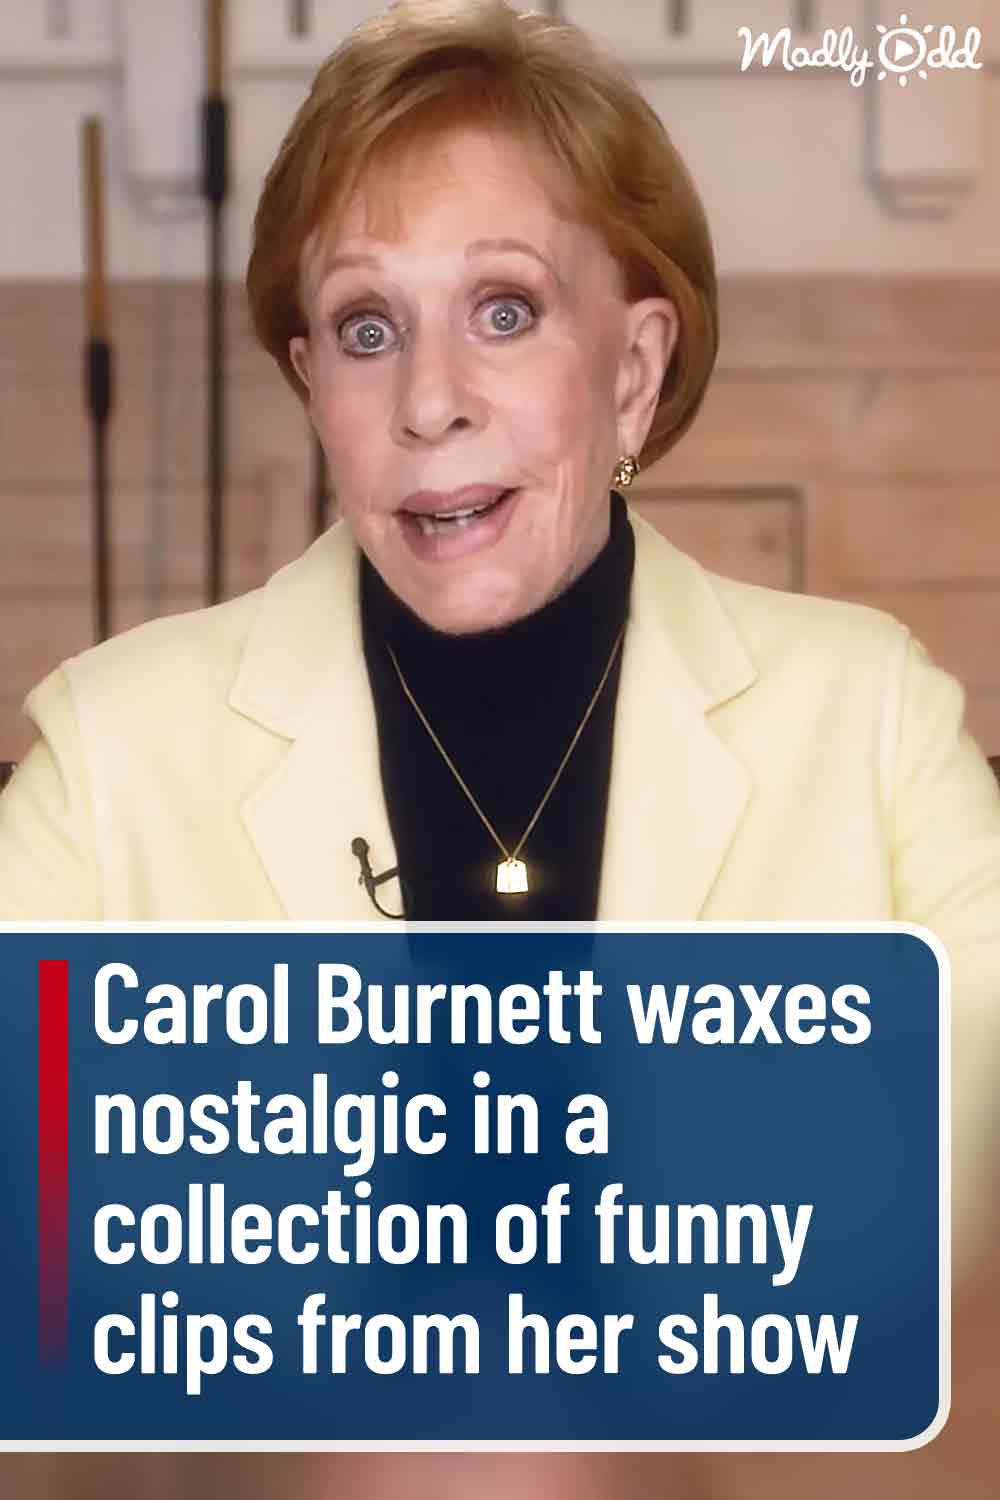 Carol Burnett waxes nostalgic in a collection of funny clips from her show